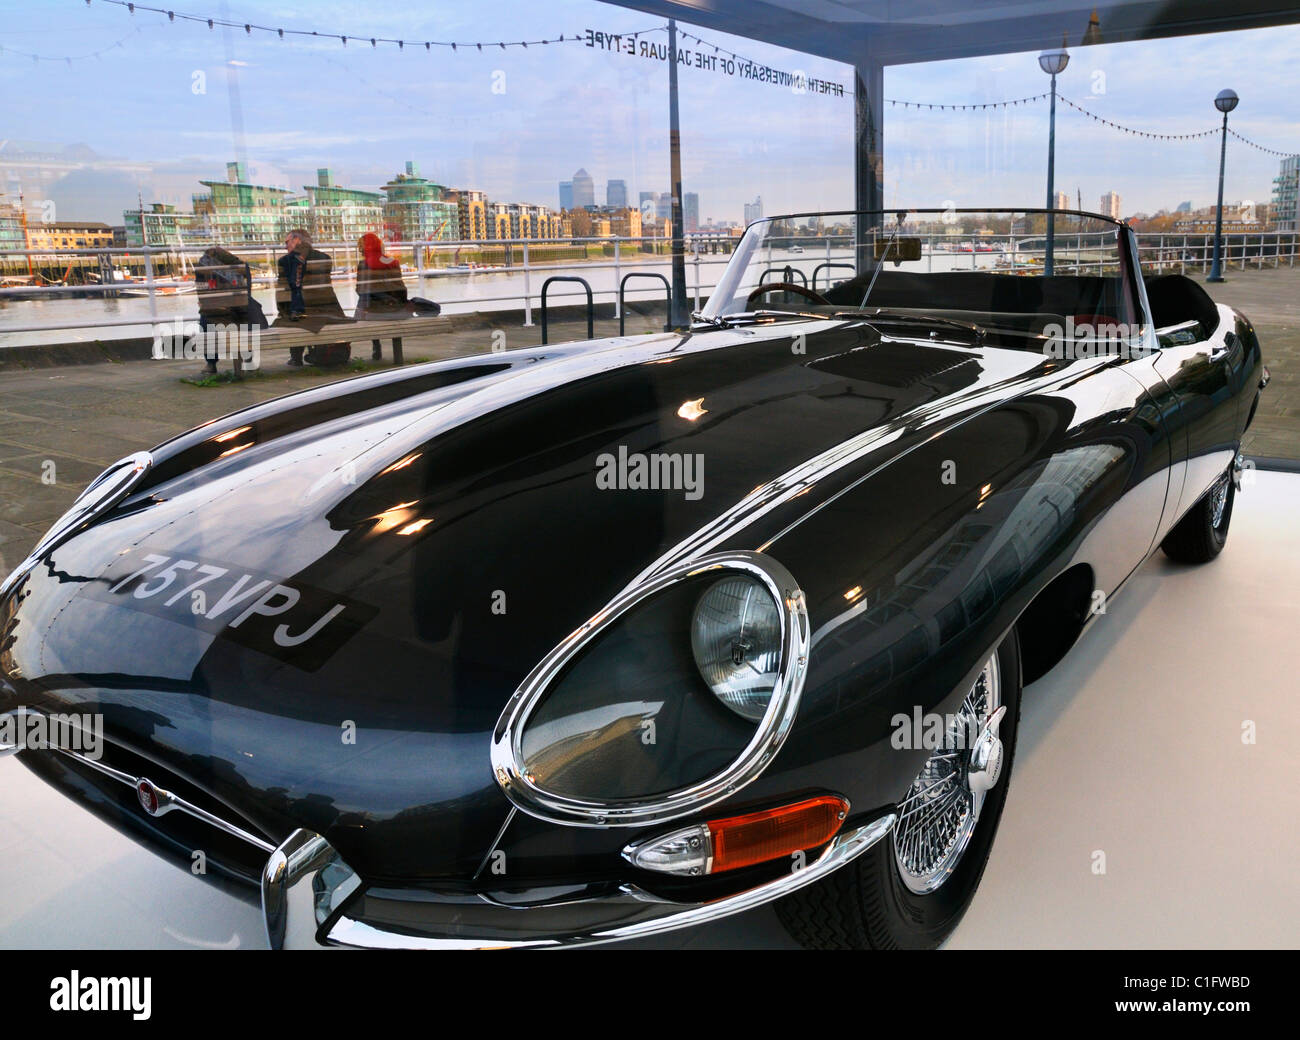 50th anniversary of the iconic E-type Jaguar, Chassis 94, on display in a glass tank outside the Design Museum, London, UK Stock Photo